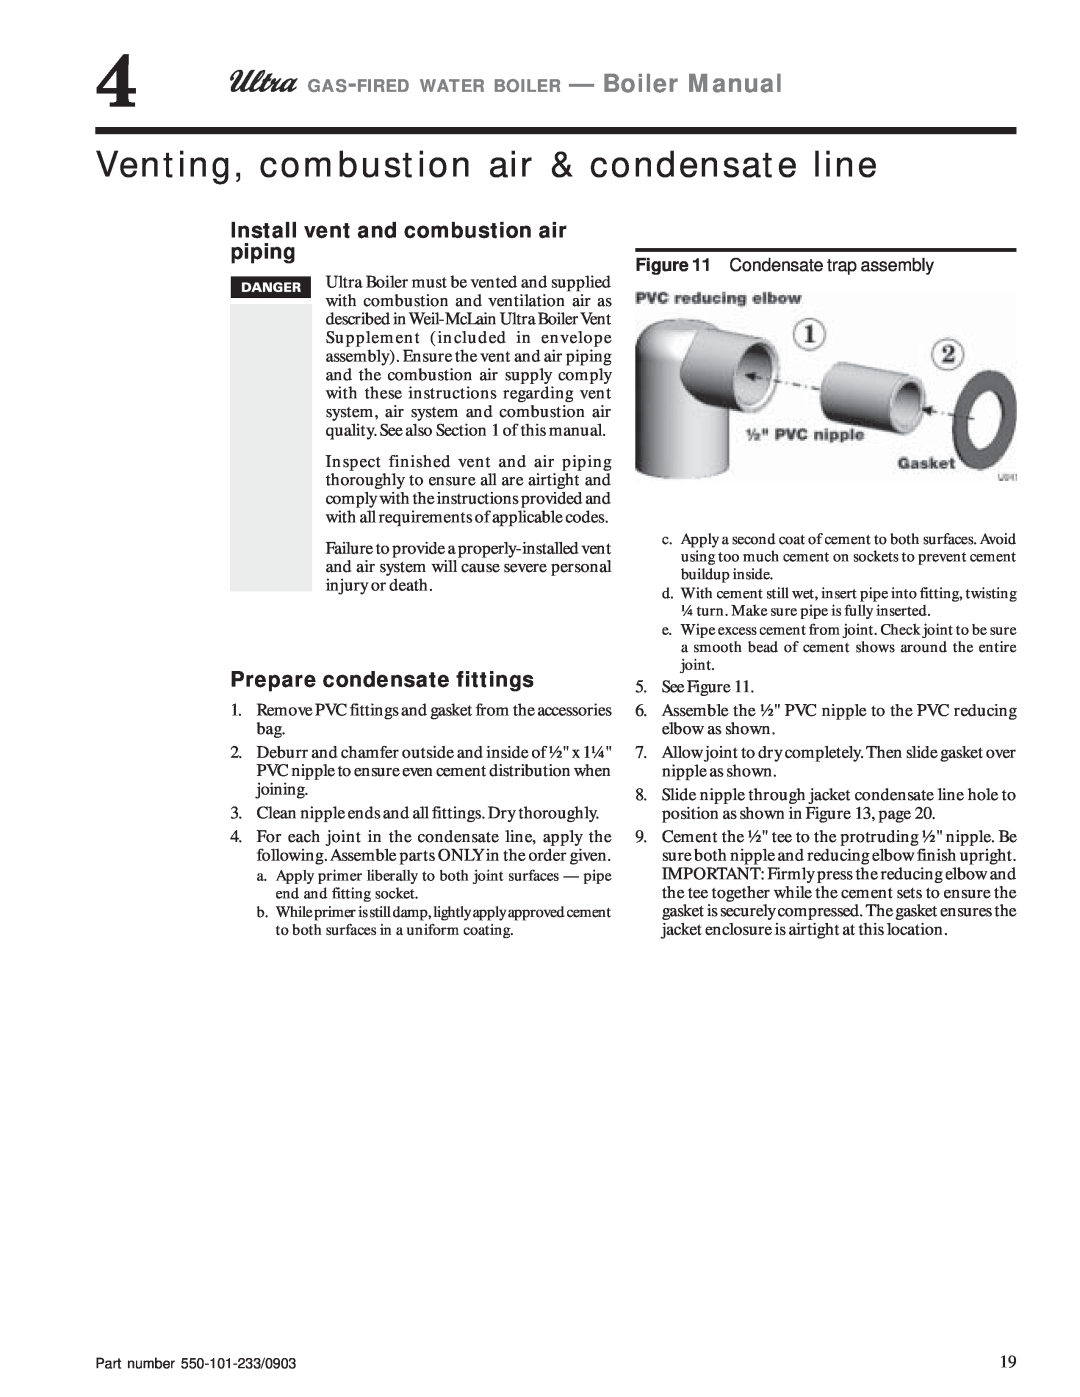 Weil-McLain 155, 80, 230, 310, 105 manual Venting, combustion air & condensate line, Install vent and combustion air piping 